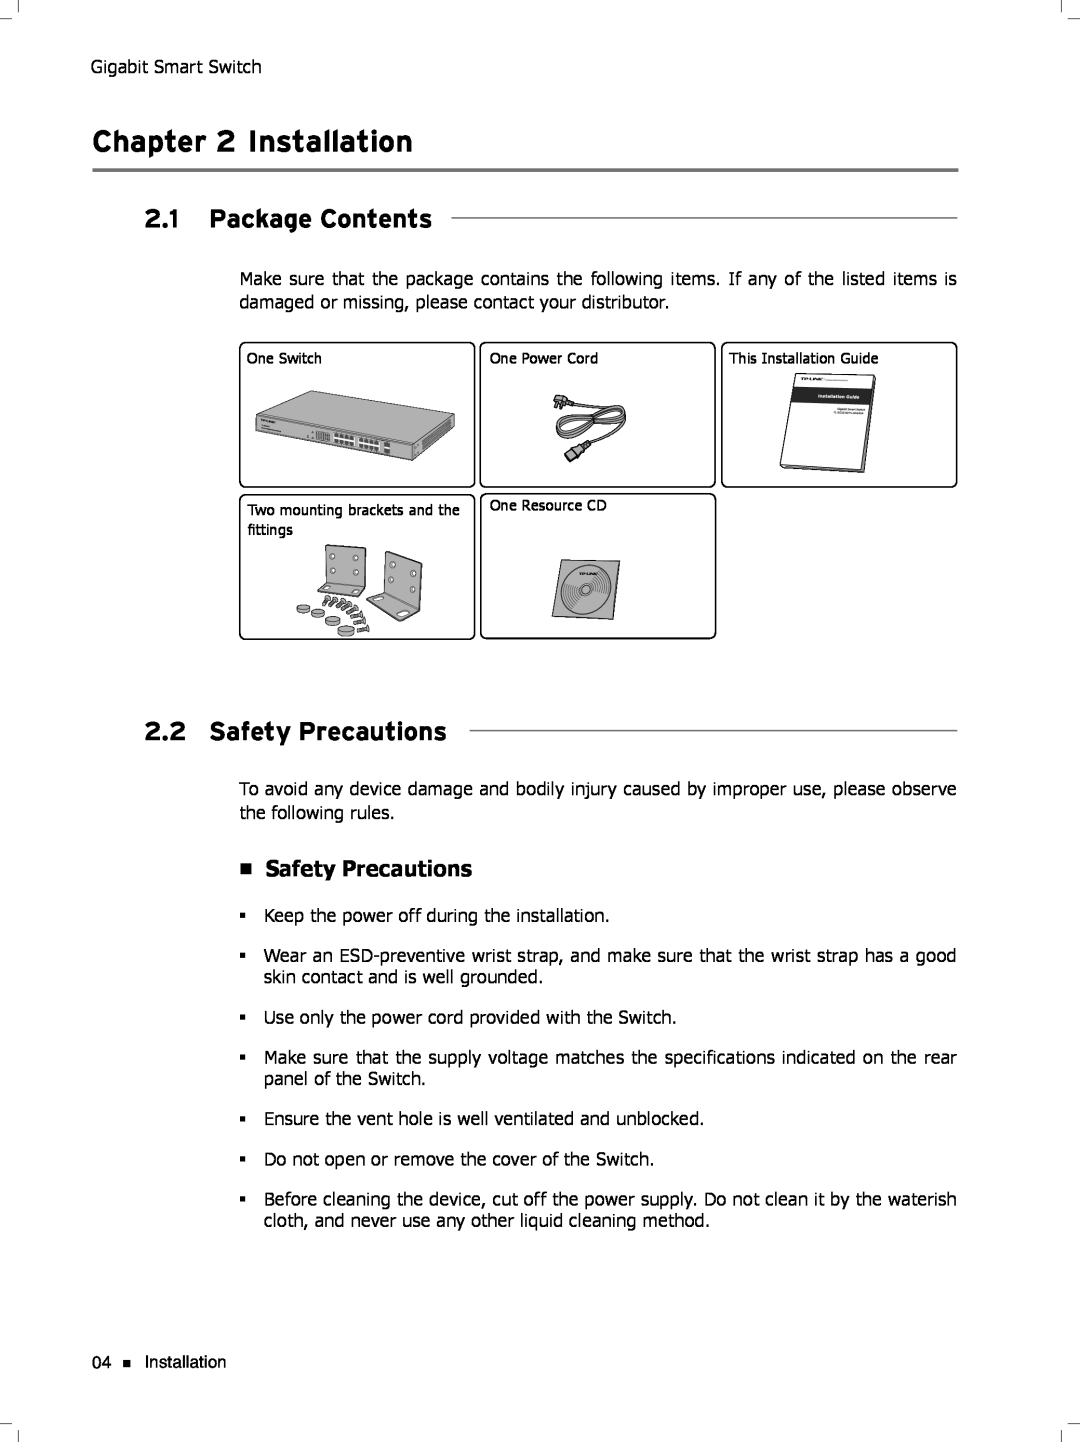 TP-Link TL-SG2424, TL-SG2216 manual CCCCCCCCCCInstallation, Package Contents, Safety Precautions 